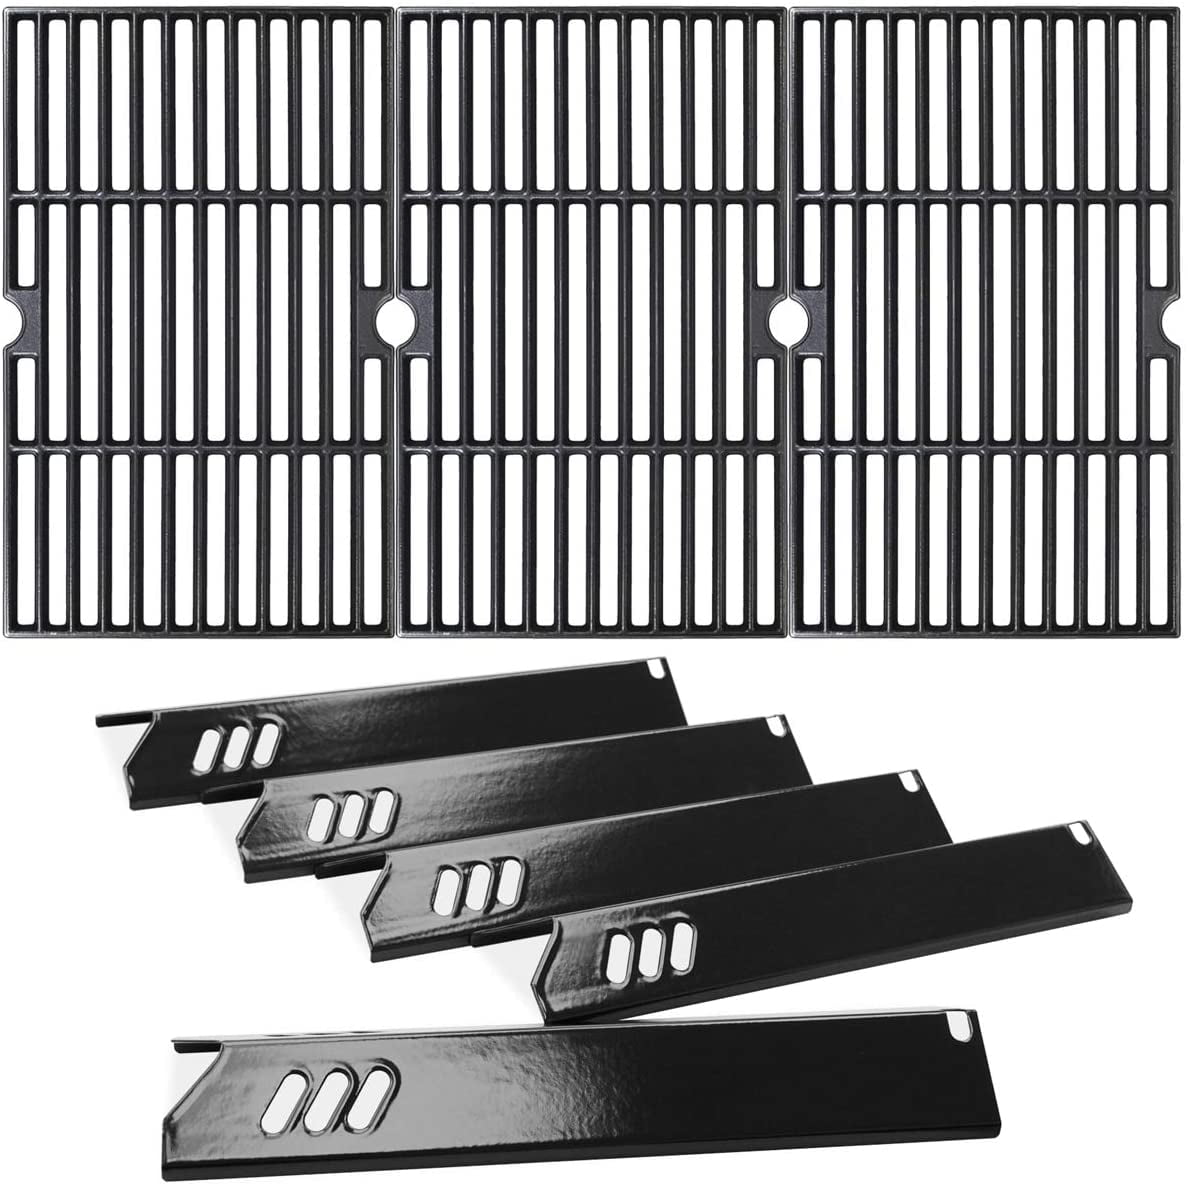 Bigbox Grill Replacement Parts for Dyna Glo Dgf493bnp Dgf510sbp 4 Pack BBQ and for sale online 